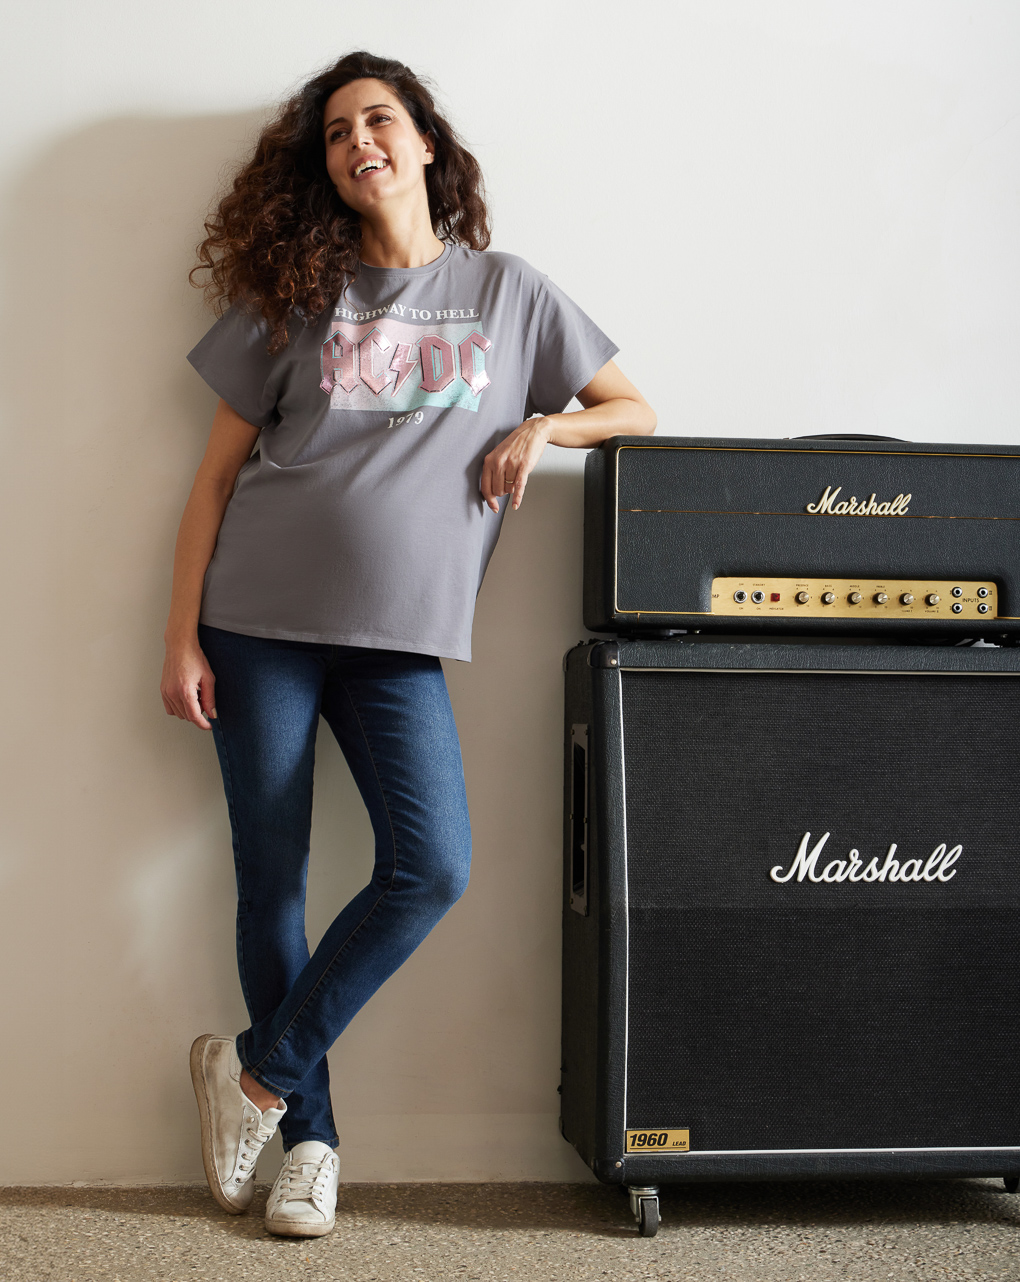 T-shirt mamma con stampa “acdc”